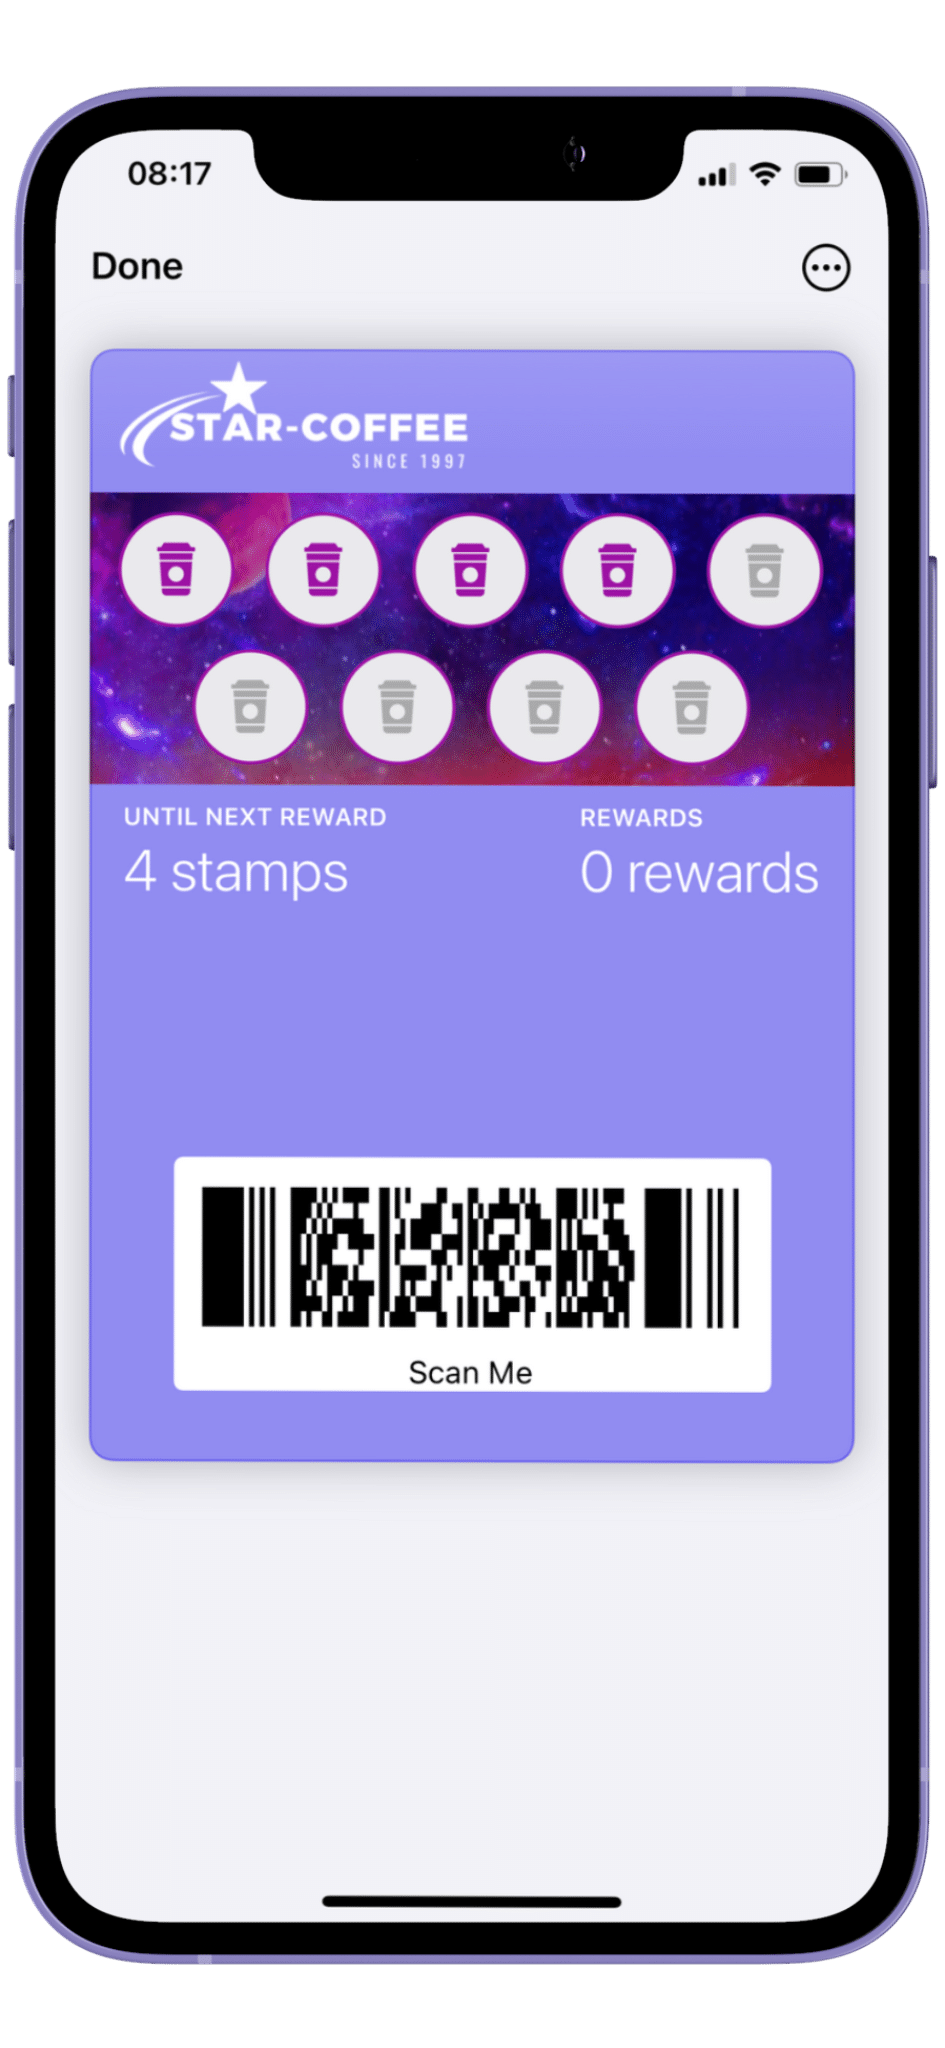 A mobile phone displaying a digital loyalty card app for a coffee shop with a barcode for scanning, indicating 4 stamps collected towards the next reward.